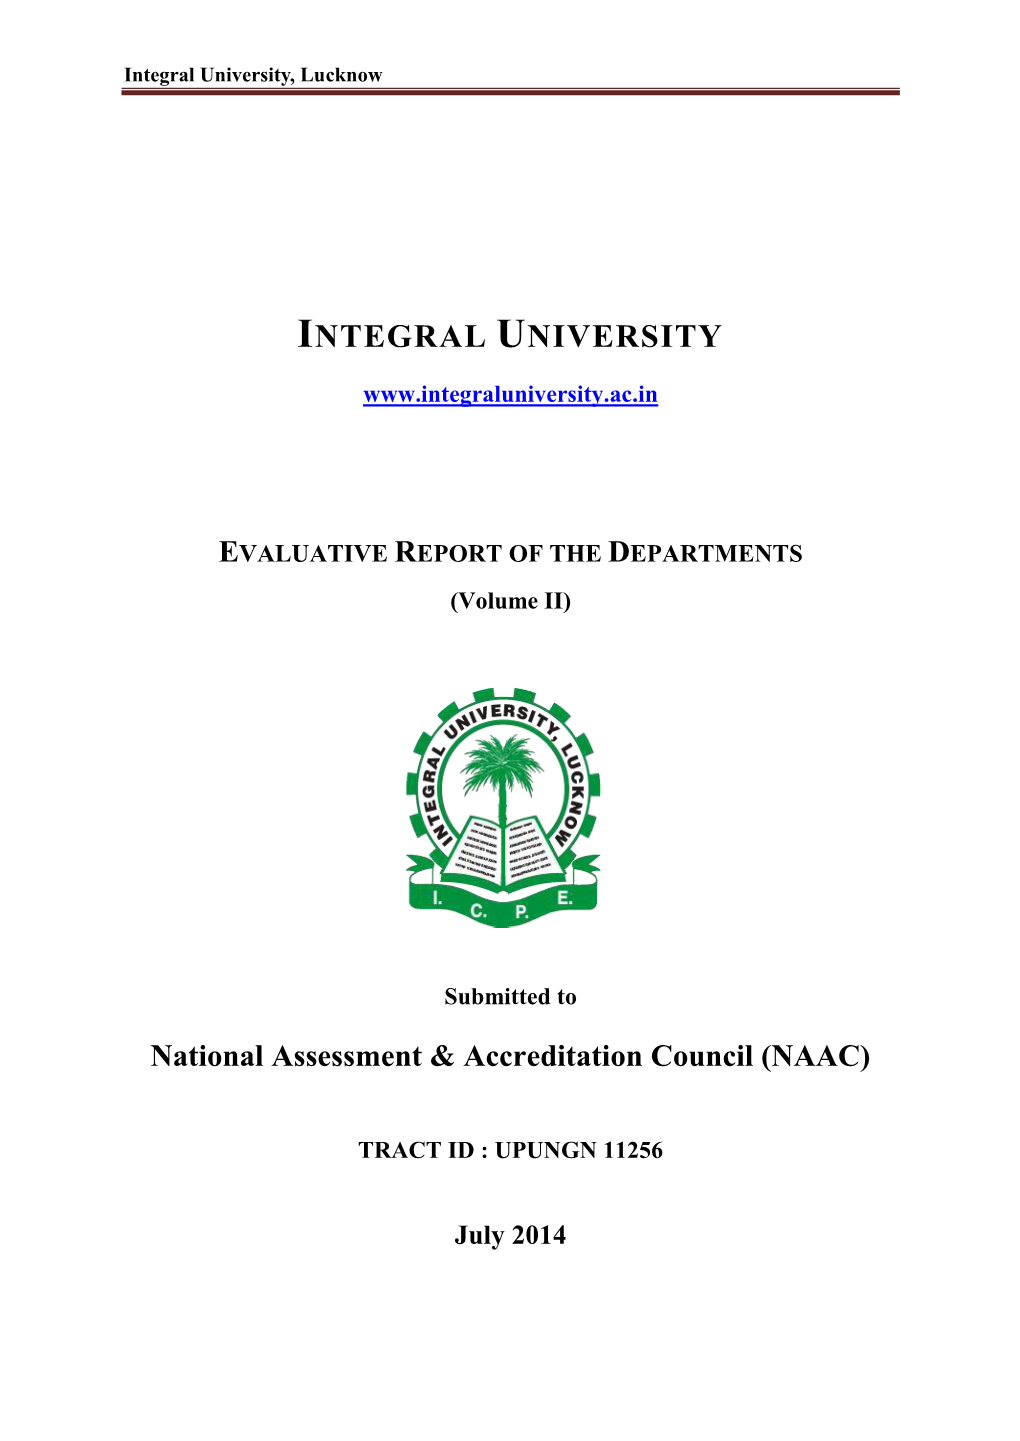 Evaluation Report of the Departments